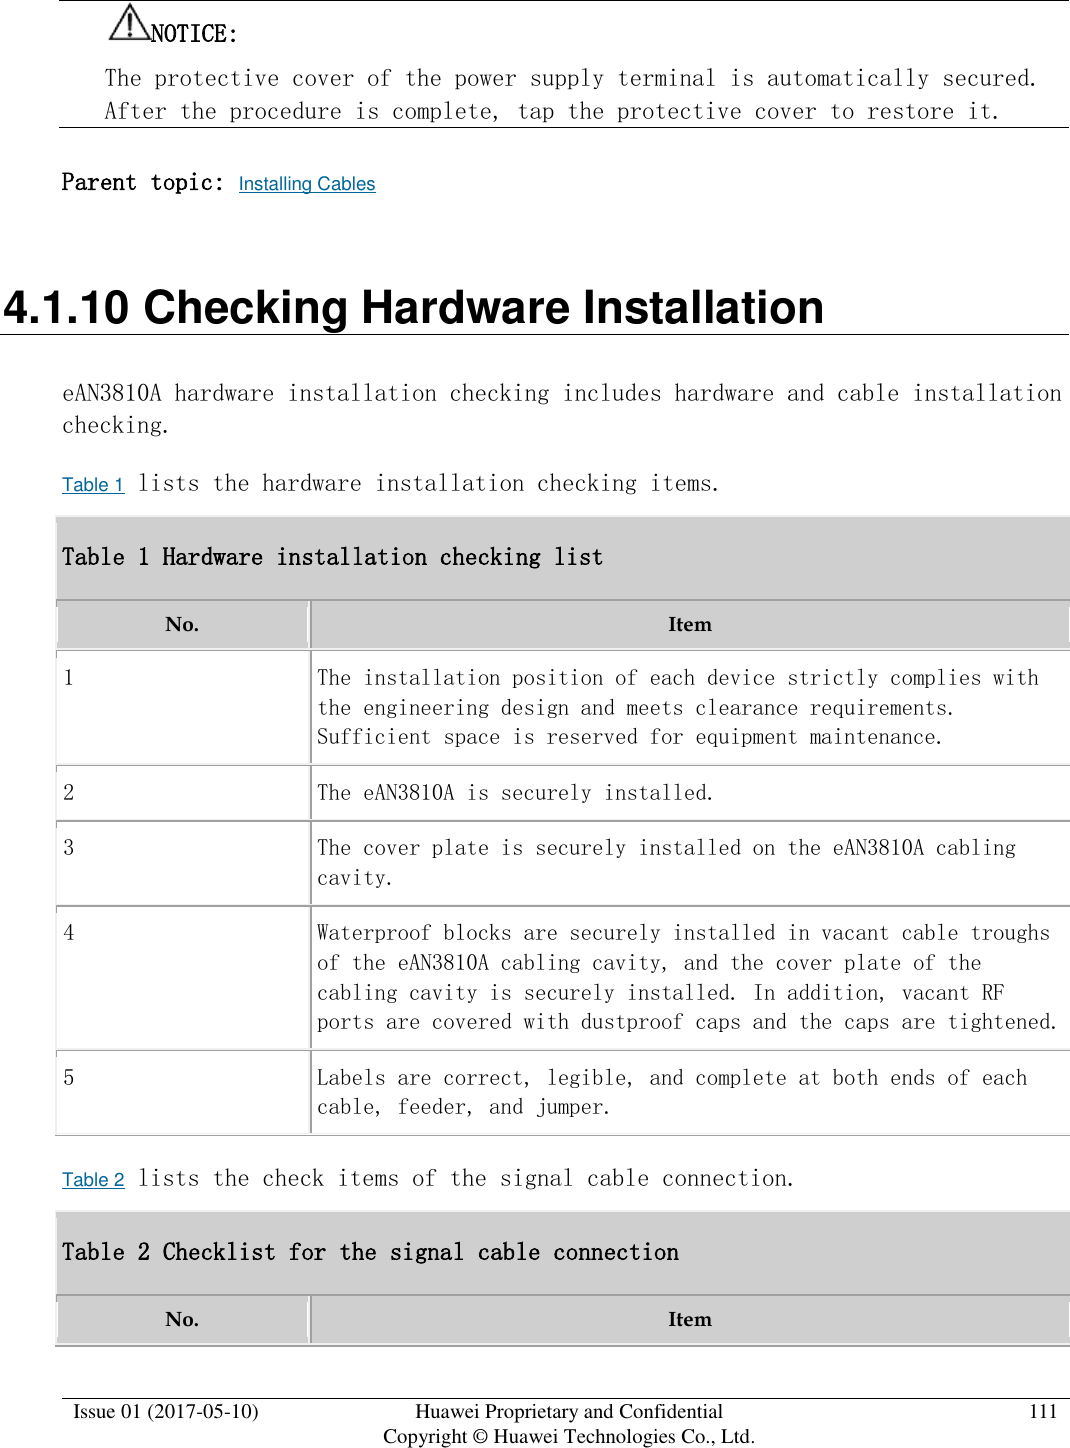  Issue 01 (2017-05-10) Huawei Proprietary and Confidential      Copyright © Huawei Technologies Co., Ltd. 111  NOTICE:  The protective cover of the power supply terminal is automatically secured. After the procedure is complete, tap the protective cover to restore it. Parent topic: Installing Cables 4.1.10 Checking Hardware Installation eAN3810A hardware installation checking includes hardware and cable installation checking.  Table 1 lists the hardware installation checking items.  Table 1 Hardware installation checking list No. Item 1 The installation position of each device strictly complies with the engineering design and meets clearance requirements. Sufficient space is reserved for equipment maintenance. 2 The eAN3810A is securely installed. 3 The cover plate is securely installed on the eAN3810A cabling cavity. 4 Waterproof blocks are securely installed in vacant cable troughs of the eAN3810A cabling cavity, and the cover plate of the cabling cavity is securely installed. In addition, vacant RF ports are covered with dustproof caps and the caps are tightened. 5 Labels are correct, legible, and complete at both ends of each cable, feeder, and jumper. Table 2 lists the check items of the signal cable connection.  Table 2 Checklist for the signal cable connection No. Item 